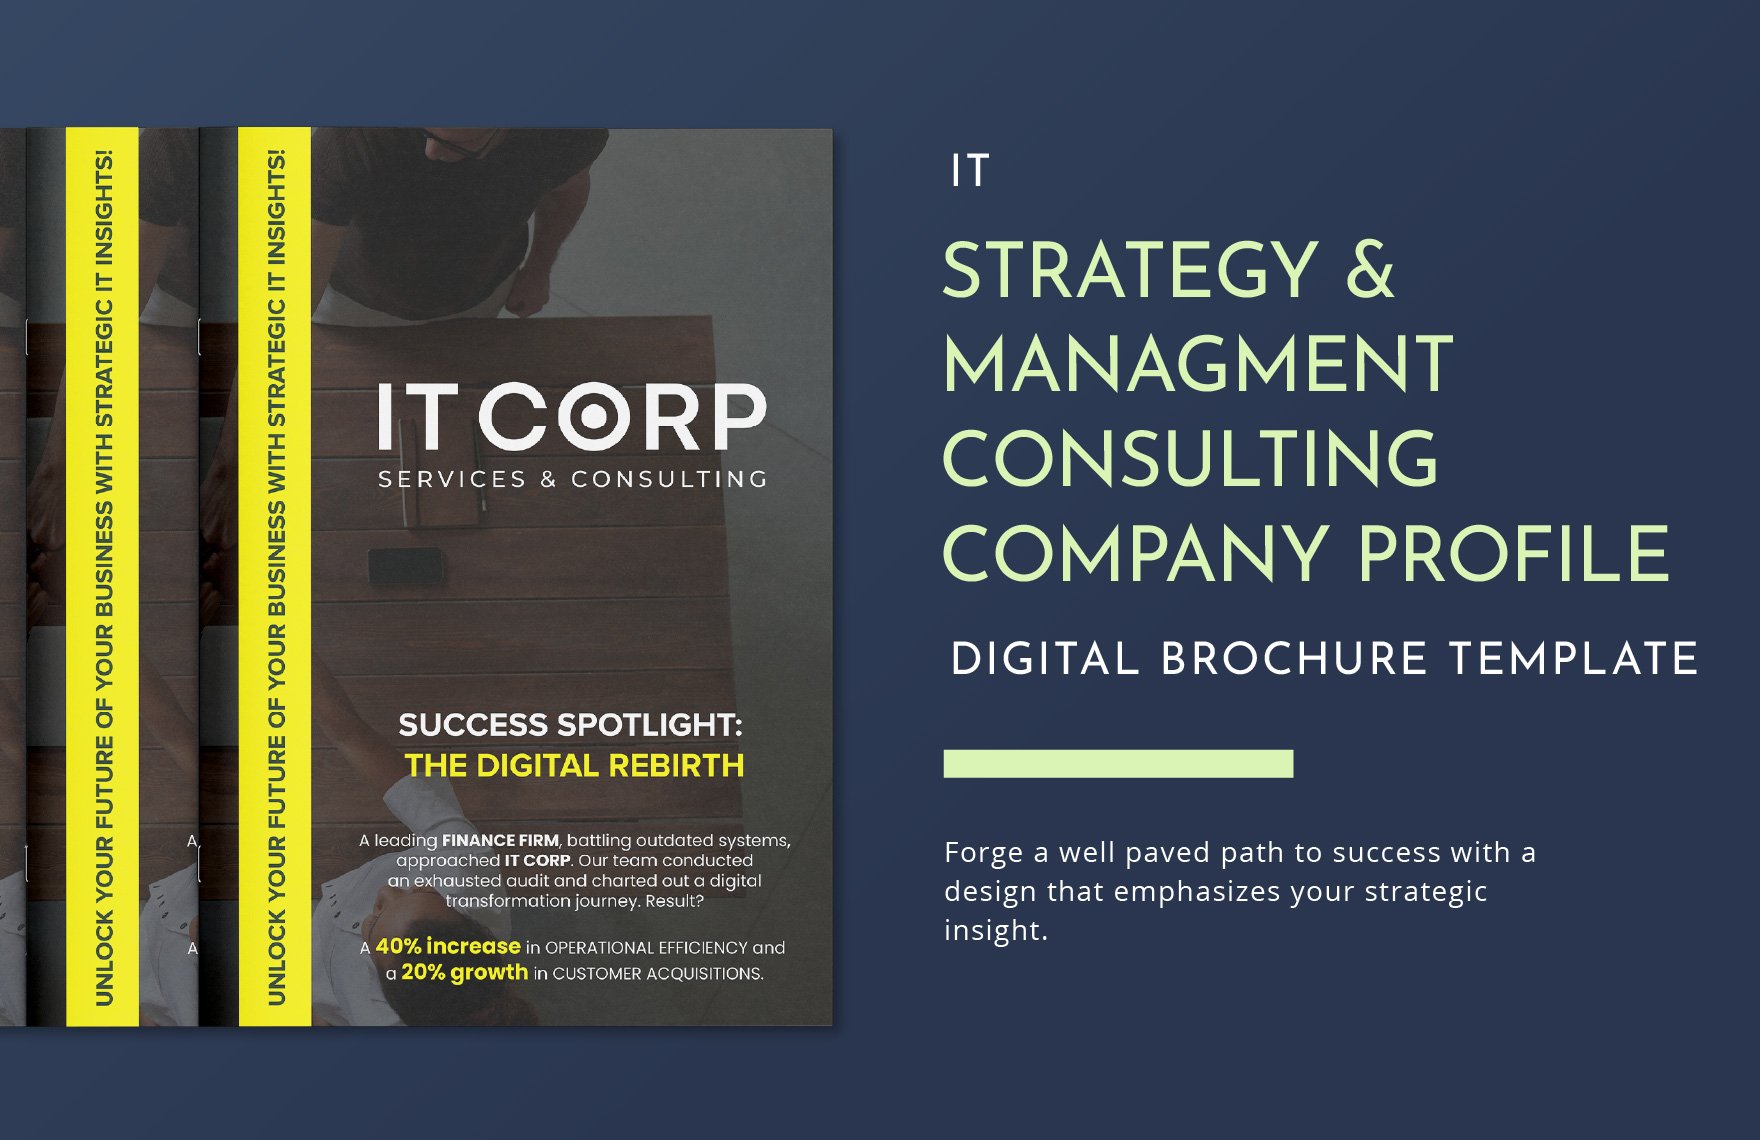 IT Strategy & Management Consulting Company Profile Digital Brochure Template in Word, Illustrator, PSD